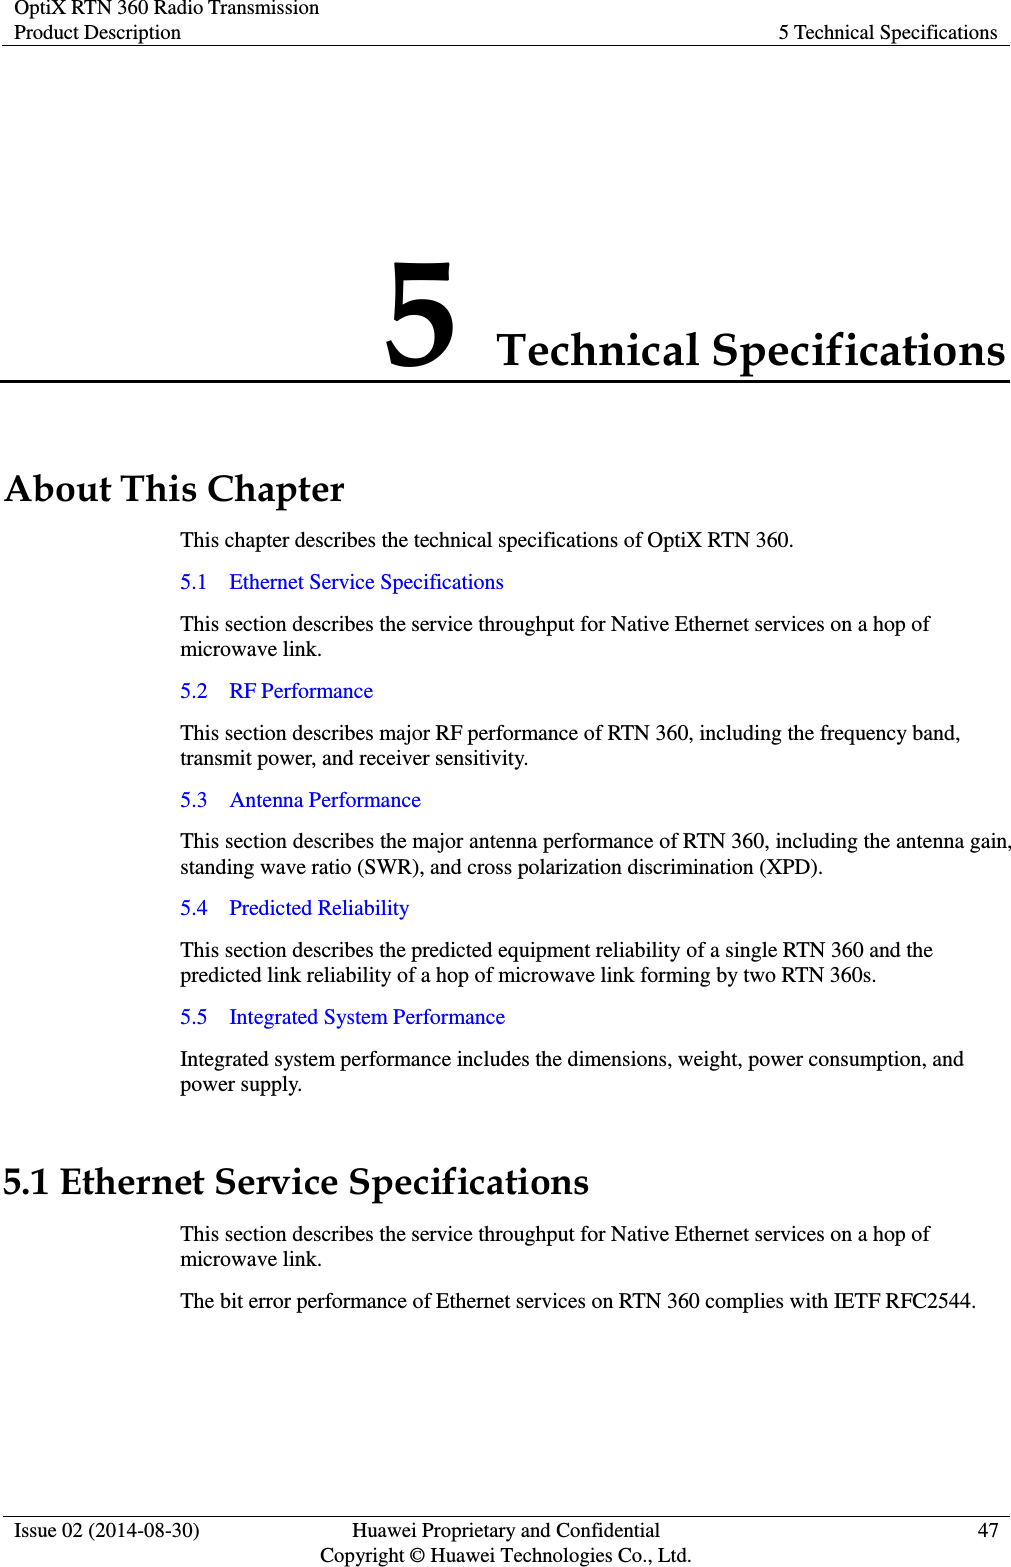 OptiX RTN 360 Radio Transmission Product Description 5 Technical Specifications  Issue 02 (2014-08-30) Huawei Proprietary and Confidential                                     Copyright © Huawei Technologies Co., Ltd. 47  5 Technical Specifications About This Chapter This chapter describes the technical specifications of OptiX RTN 360. 5.1    Ethernet Service Specifications This section describes the service throughput for Native Ethernet services on a hop of microwave link. 5.2    RF Performance This section describes major RF performance of RTN 360, including the frequency band, transmit power, and receiver sensitivity. 5.3    Antenna Performance This section describes the major antenna performance of RTN 360, including the antenna gain, standing wave ratio (SWR), and cross polarization discrimination (XPD). 5.4    Predicted Reliability This section describes the predicted equipment reliability of a single RTN 360 and the predicted link reliability of a hop of microwave link forming by two RTN 360s. 5.5    Integrated System Performance Integrated system performance includes the dimensions, weight, power consumption, and power supply. 5.1 Ethernet Service Specifications This section describes the service throughput for Native Ethernet services on a hop of microwave link. The bit error performance of Ethernet services on RTN 360 complies with IETF RFC2544. 